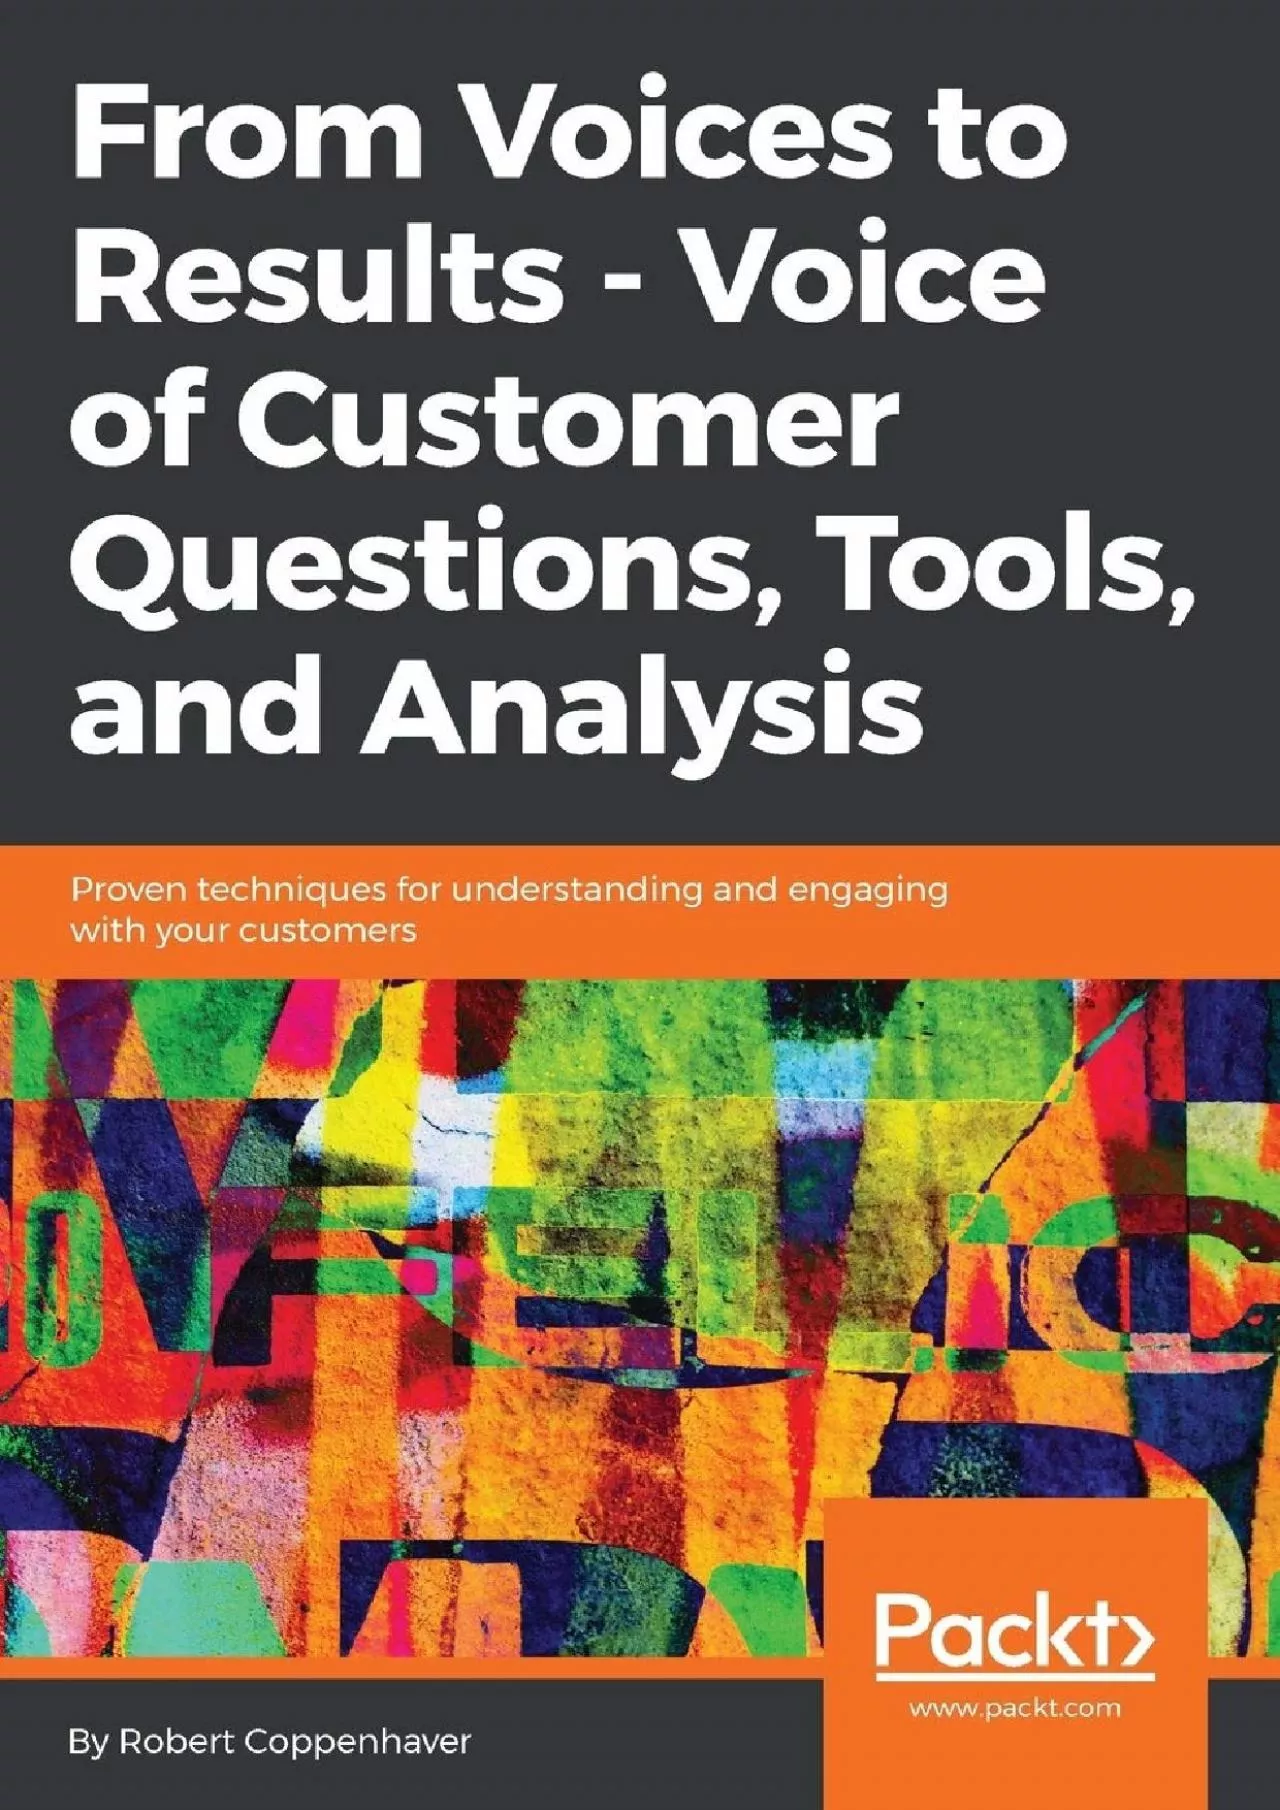 From Voices to Results - Voice of Customer Questions, Tools and Analysis: Proven techniques